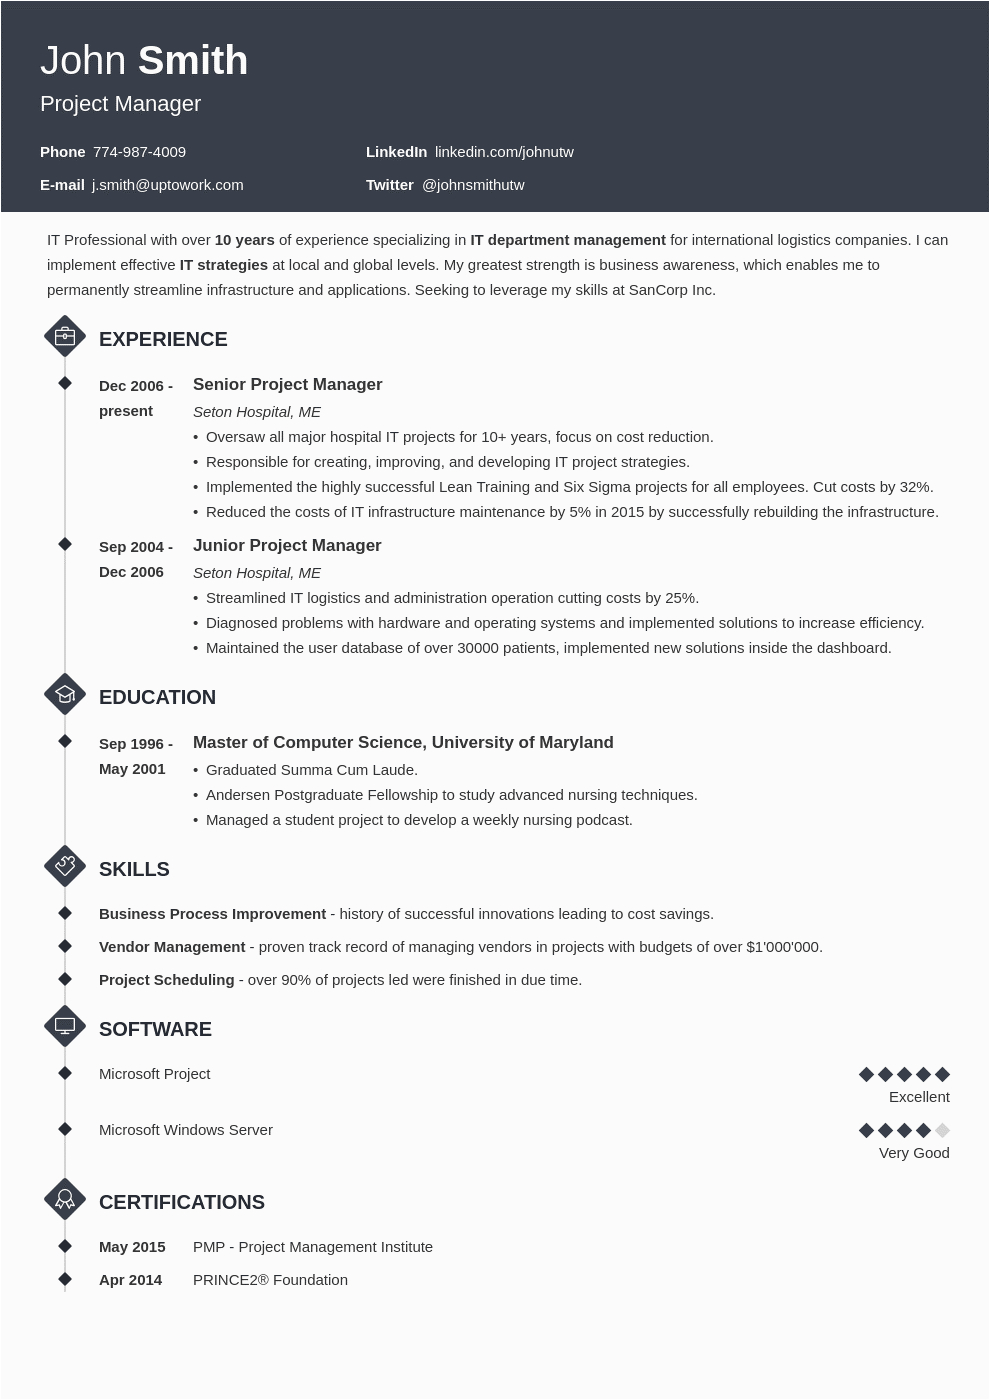 Sample Resume with Current Work Experience Current Resume Styles—find the Best E <div id='gallery-1' class='gallery galleryid-73482 gallery-columns-3 gallery-size-thumbnail'><figure class='gallery-item'>
			<div class='gallery-icon portrait'>
				<a href='https://www.naturestudycentre.org/sample-resume-with-current-work-experience-2/sample-resume-with-current-work-experience-work-experience-resume/'><img width="116" height="150" src="https://www.naturestudycentre.org/wp-content/uploads/2022/10/sample-resume-with-current-work-experience-work-experience-resume-of-sample-resume-with-current-work-experience.png" class="attachment-thumbnail size-thumbnail" alt="Sample Resume with Current Work Experience Work Experience Resume" aria-describedby="gallery-1-73483" /></a>
			</div>
				<figcaption class='wp-caption-text gallery-caption' id='gallery-1-73483'>
				Work Experience Resume
				</figcaption></figure><figure class='gallery-item'>
			<div class='gallery-icon portrait'>
				<a href='https://www.naturestudycentre.org/sample-resume-with-current-work-experience-2/sample-resume-with-current-work-experience-resume-templates-limited-work-experience-resumetemplates/'><img width="116" height="150" src="https://www.naturestudycentre.org/wp-content/uploads/2022/10/sample-resume-with-current-work-experience-resume-templates-limited-work-experience-resumetemplates-of-sample-resume-with-current-work-experience.png" class="attachment-thumbnail size-thumbnail" alt="Sample Resume with Current Work Experience Resume Templates Limited Work Experience Resumetemplates" aria-describedby="gallery-1-73484" /></a>
			</div>
				<figcaption class='wp-caption-text gallery-caption' id='gallery-1-73484'>
				Resume Templates Limited Work Experience ResumeTemplates
				</figcaption></figure><figure class='gallery-item'>
			<div class='gallery-icon portrait'>
				<a href='https://www.naturestudycentre.org/sample-resume-with-current-work-experience-2/sample-resume-with-current-work-experience-best-current-college-student-resume-with-no-experience/'><img width="116" height="150" src="https://www.naturestudycentre.org/wp-content/uploads/2022/10/sample-resume-with-current-work-experience-best-current-college-student-resume-with-no-experience-of-sample-resume-with-current-work-experience.jpg" class="attachment-thumbnail size-thumbnail" alt="Sample Resume with Current Work Experience Best Current College Student Resume with No Experience" aria-describedby="gallery-1-73485" /></a>
			</div>
				<figcaption class='wp-caption-text gallery-caption' id='gallery-1-73485'>
				Best Current College Student Resume with No Experience
				</figcaption></figure><figure class='gallery-item'>
			<div class='gallery-icon portrait'>
				<a href='https://www.naturestudycentre.org/sample-resume-with-current-work-experience-2/sample-resume-with-current-work-experience-how-to-customize-your-resume-for-each-job-you-apply-to-marketing-muses/'><img width="111" height="150" src="https://www.naturestudycentre.org/wp-content/uploads/2022/10/sample-resume-with-current-work-experience-how-to-customize-your-resume-for-each-job-you-apply-to-marketing-muses-of-sample-resume-with-current-work-experience.png" class="attachment-thumbnail size-thumbnail" alt="Sample Resume with Current Work Experience How to Customize Your Resume for Each Job You Apply to – Marketing Muses" aria-describedby="gallery-1-73486" /></a>
			</div>
				<figcaption class='wp-caption-text gallery-caption' id='gallery-1-73486'>
				How to Customize Your Resume for Each Job You Apply to – Marketing Muses
				</figcaption></figure><figure class='gallery-item'>
			<div class='gallery-icon portrait'>
				<a href='https://www.naturestudycentre.org/sample-resume-with-current-work-experience-2/sample-resume-with-current-work-experience-current-college-student-resume-planner-template-free/'><img width="116" height="150" src="https://www.naturestudycentre.org/wp-content/uploads/2022/10/sample-resume-with-current-work-experience-current-college-student-resume-planner-template-free-of-sample-resume-with-current-work-experience.png" class="attachment-thumbnail size-thumbnail" alt="Sample Resume with Current Work Experience Current College Student Resume – Planner Template Free" aria-describedby="gallery-1-73487" /></a>
			</div>
				<figcaption class='wp-caption-text gallery-caption' id='gallery-1-73487'>
				Current College Student Resume – planner template free
				</figcaption></figure><figure class='gallery-item'>
			<div class='gallery-icon portrait'>
				<a href='https://www.naturestudycentre.org/sample-resume-with-current-work-experience-2/sample-resume-with-current-work-experience-best-current-college-student-resume-with-no-experience-2/'><img width="114" height="150" src="https://www.naturestudycentre.org/wp-content/uploads/2022/10/sample-resume-with-current-work-experience-best-current-college-student-resume-with-no-experience-of-sample-resume-with-current-work-experience-1.jpg" class="attachment-thumbnail size-thumbnail" alt="Sample Resume with Current Work Experience Best Current College Student Resume with No Experience" aria-describedby="gallery-1-73488" /></a>
			</div>
				<figcaption class='wp-caption-text gallery-caption' id='gallery-1-73488'>
				Best Current College Student Resume with No Experience
				</figcaption></figure><figure class='gallery-item'>
			<div class='gallery-icon landscape'>
				<a href='https://www.naturestudycentre.org/sample-resume-with-current-work-experience-2/sample-resume-with-current-work-experience-part-time-job-resume-writing-tips-and-examples/'><img width="150" height="150" src="https://www.naturestudycentre.org/wp-content/uploads/2022/10/sample-resume-with-current-work-experience-part-time-job-resume-writing-tips-and-examples-of-sample-resume-with-current-work-experience.png" class="attachment-thumbnail size-thumbnail" alt="Sample Resume with Current Work Experience Part Time Job Resume Writing Tips and Examples" aria-describedby="gallery-1-73489" /></a>
			</div>
				<figcaption class='wp-caption-text gallery-caption' id='gallery-1-73489'>
				Part time Job Resume Writing Tips and Examples
				</figcaption></figure><figure class='gallery-item'>
			<div class='gallery-icon portrait'>
				<a href='https://www.naturestudycentre.org/sample-resume-with-current-work-experience-2/sample-resume-with-current-work-experience-current-resume-styles-find-the-best-e-gallery-tips/'><img width="106" height="150" src="https://www.naturestudycentre.org/wp-content/uploads/2022/10/sample-resume-with-current-work-experience-current-resume-styles-find-the-best-e-gallery-tips-of-sample-resume-with-current-work-experience.png" class="attachment-thumbnail size-thumbnail" alt="Sample Resume with Current Work Experience Current Resume Styles—find the Best E [gallery & Tips]" aria-describedby="gallery-1-73490" /></a>
			</div>
				<figcaption class='wp-caption-text gallery-caption' id='gallery-1-73490'>
				Current Resume Styles—Find the Best e [Gallery & Tips]
				</figcaption></figure><figure class='gallery-item'>
			<div class='gallery-icon portrait'>
				<a href='https://www.naturestudycentre.org/sample-resume-with-current-work-experience-2/sample-resume-with-current-work-experience-resume-format-for-experienced-person-best-resume-format-2021-3/'><img width="123" height="150" src="https://www.naturestudycentre.org/wp-content/uploads/2022/10/sample-resume-with-current-work-experience-resume-format-for-experienced-person-best-resume-format-2021-3-of-sample-resume-with-current-work-experience.jpg" class="attachment-thumbnail size-thumbnail" alt="Sample Resume with Current Work Experience Resume format for Experienced Person Best Resume format 2021 3" aria-describedby="gallery-1-73491" /></a>
			</div>
				<figcaption class='wp-caption-text gallery-caption' id='gallery-1-73491'>
				Resume Format For Experienced Person Best Resume Format 2021 3
				</figcaption></figure>
		</div>
